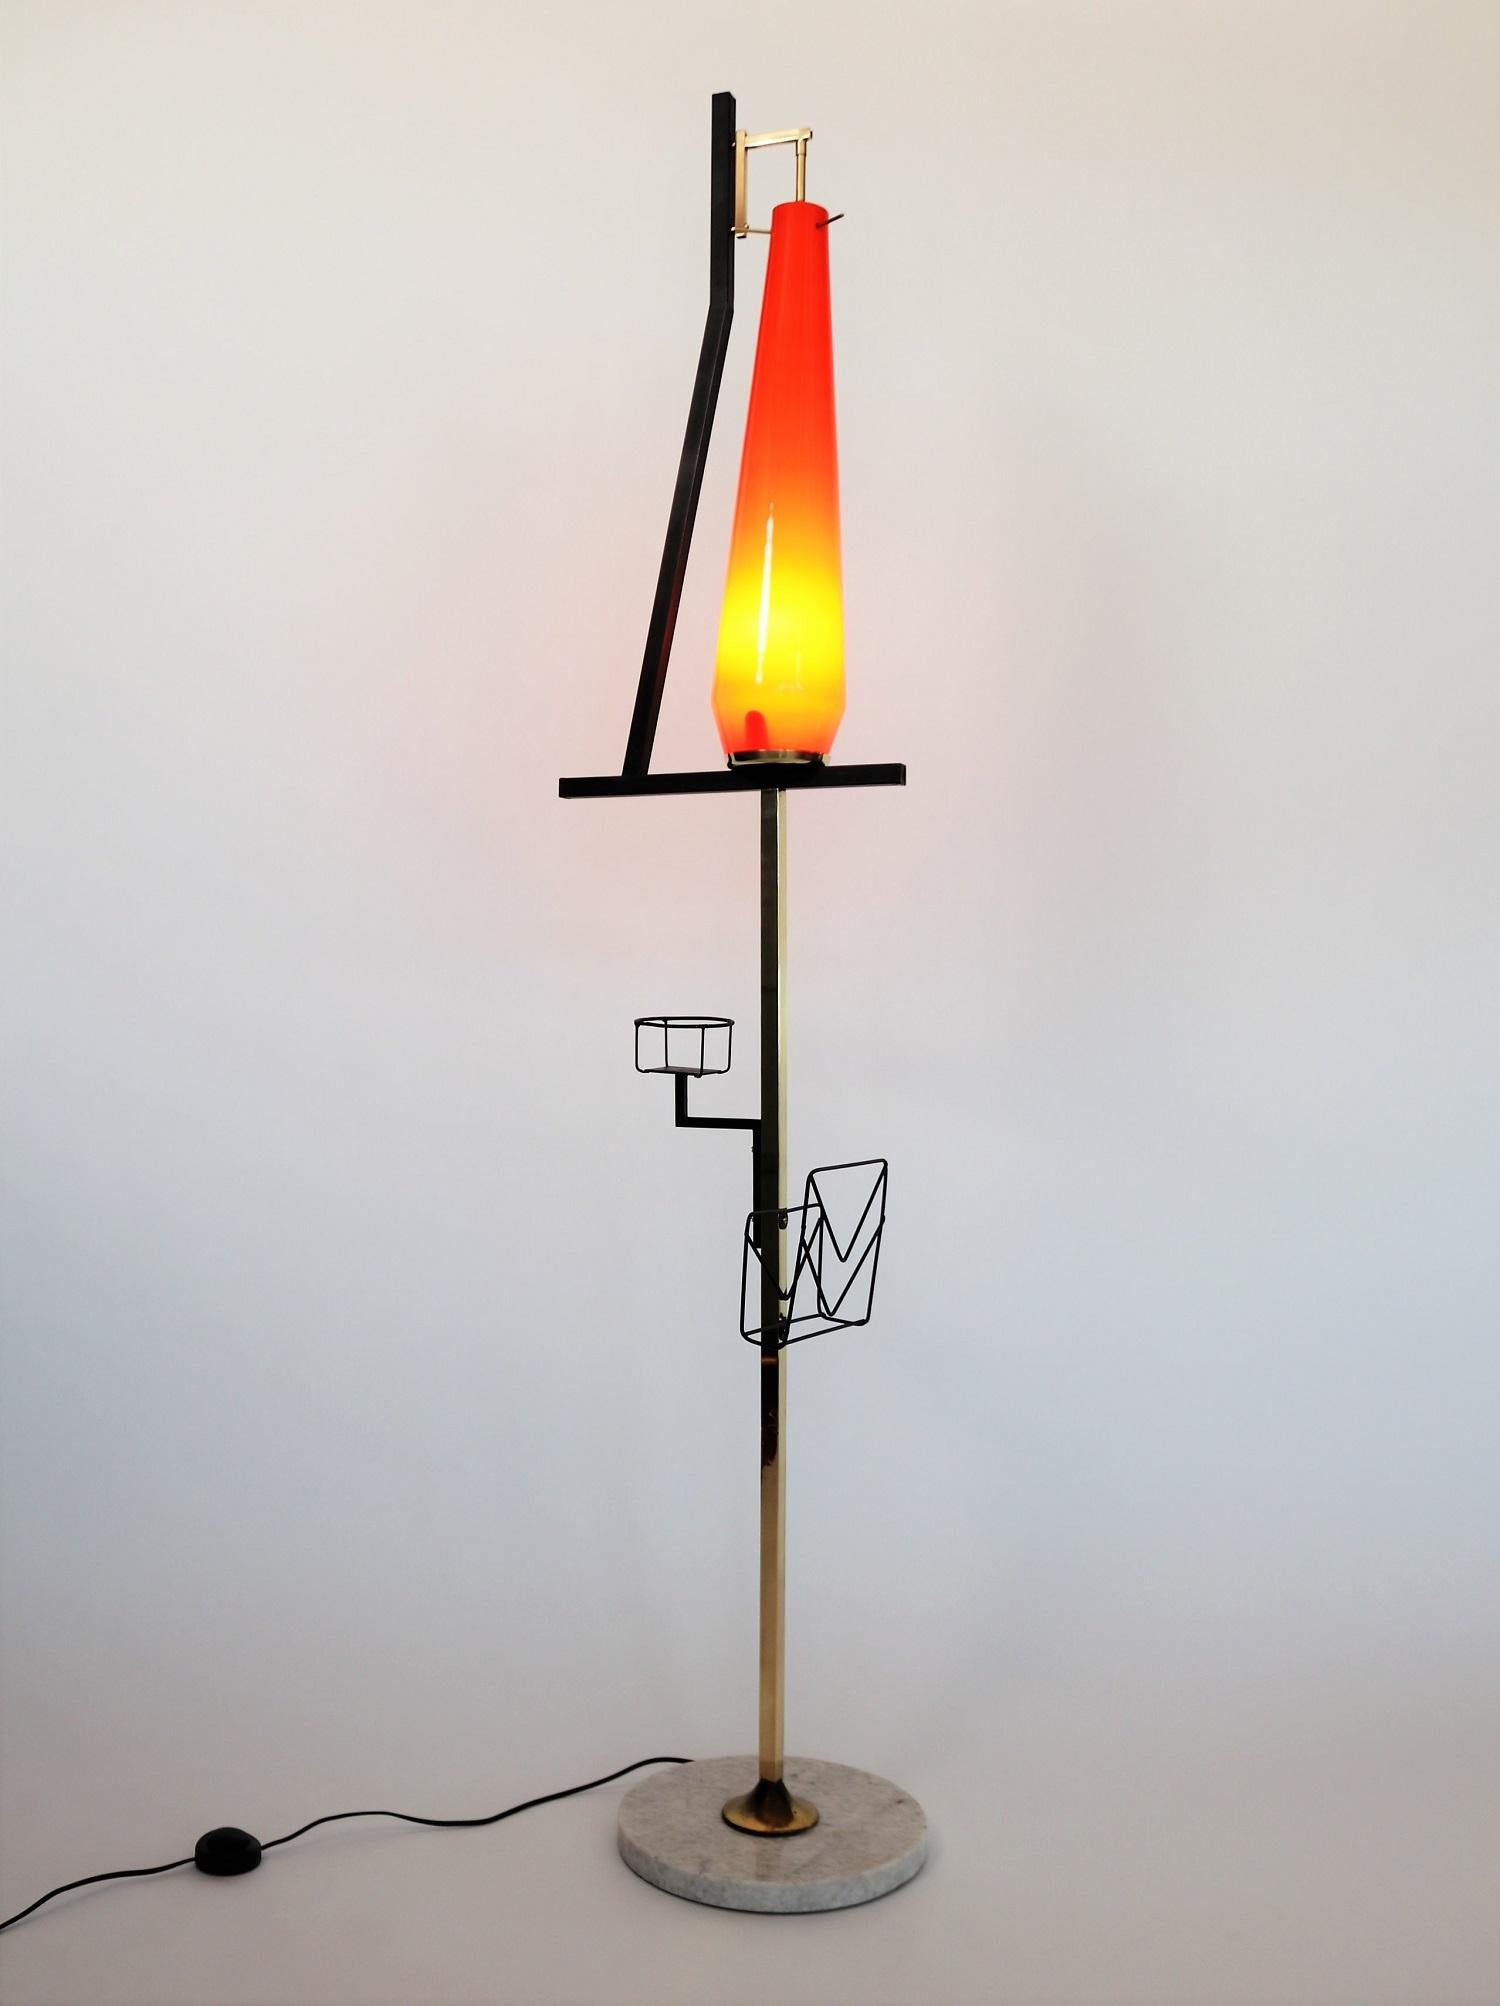 Crazy Italian floor lamp originally from the 1950s with shiny red glass and two metal holders for newspapers and a drink (?) or a small flowerpot. Stilnovo style.
The base is made of clear marble with some signs of wear and age.
The framework are